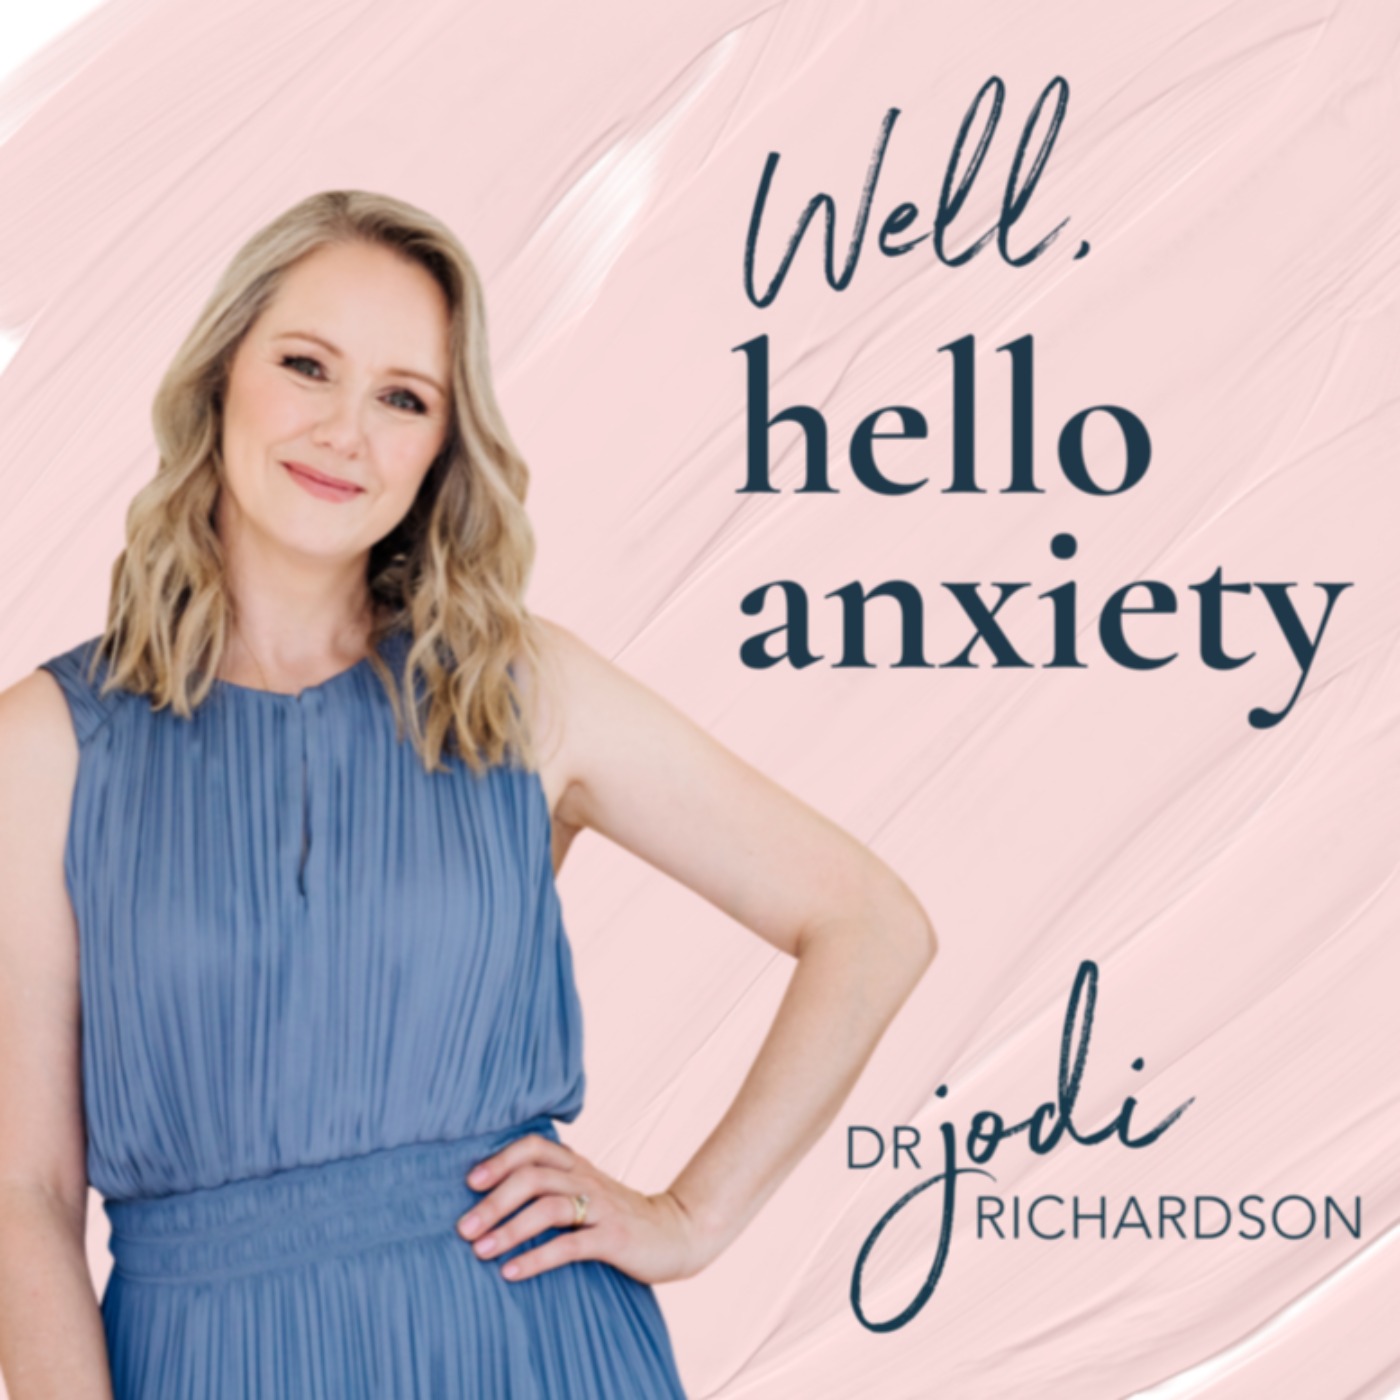 Coping strategies for tough times with Dr Jodi Richardson